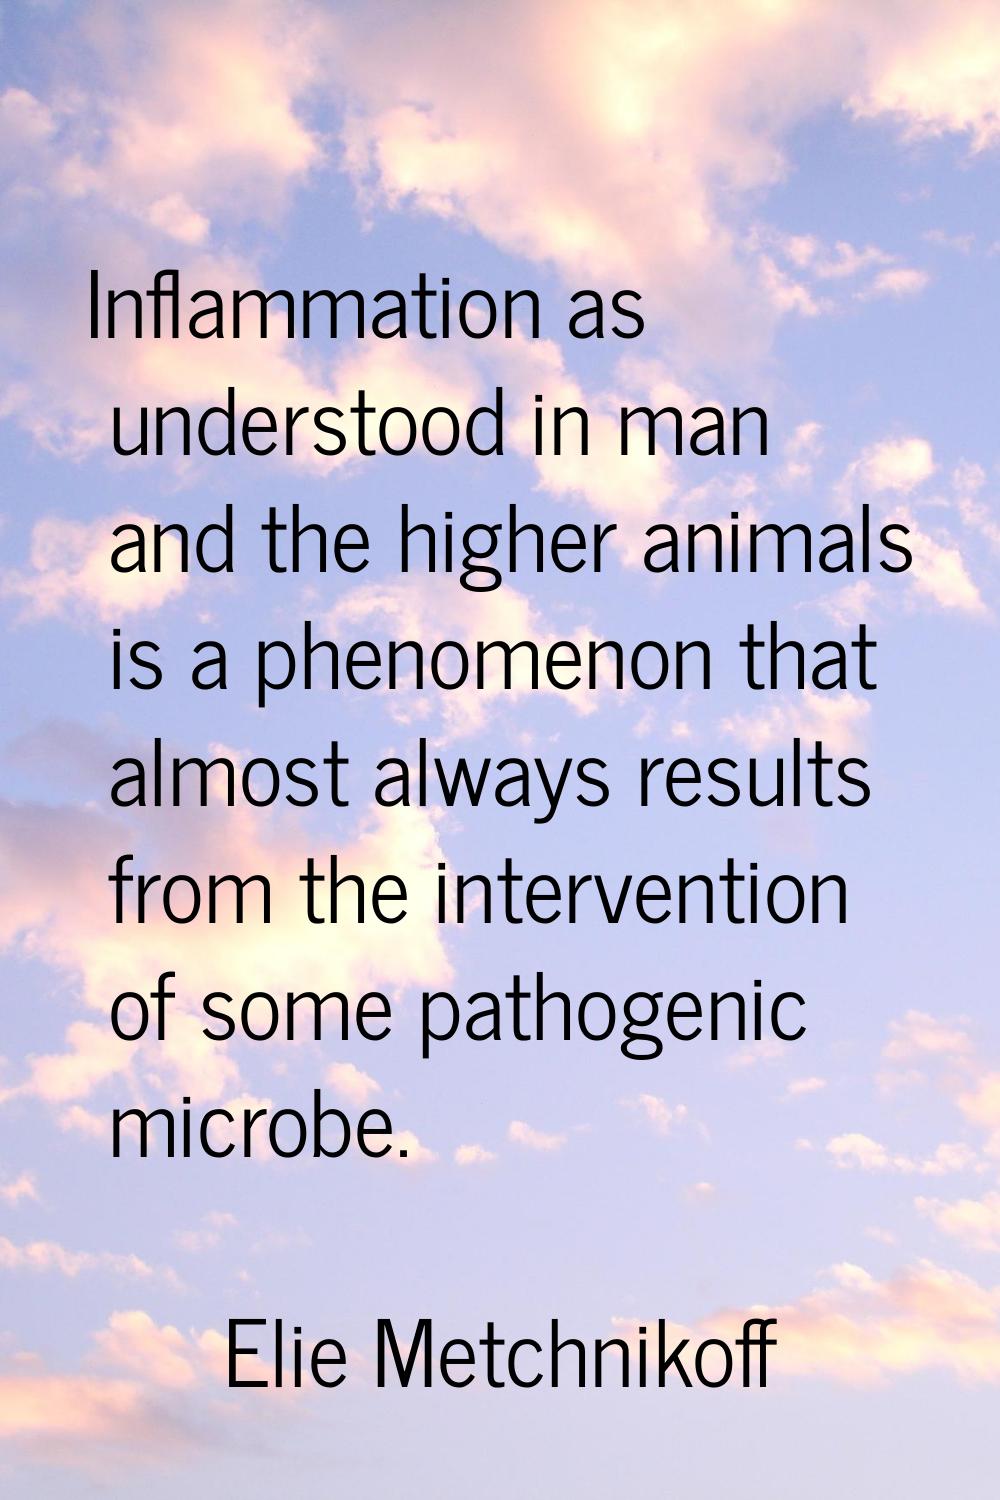 Inflammation as understood in man and the higher animals is a phenomenon that almost always results